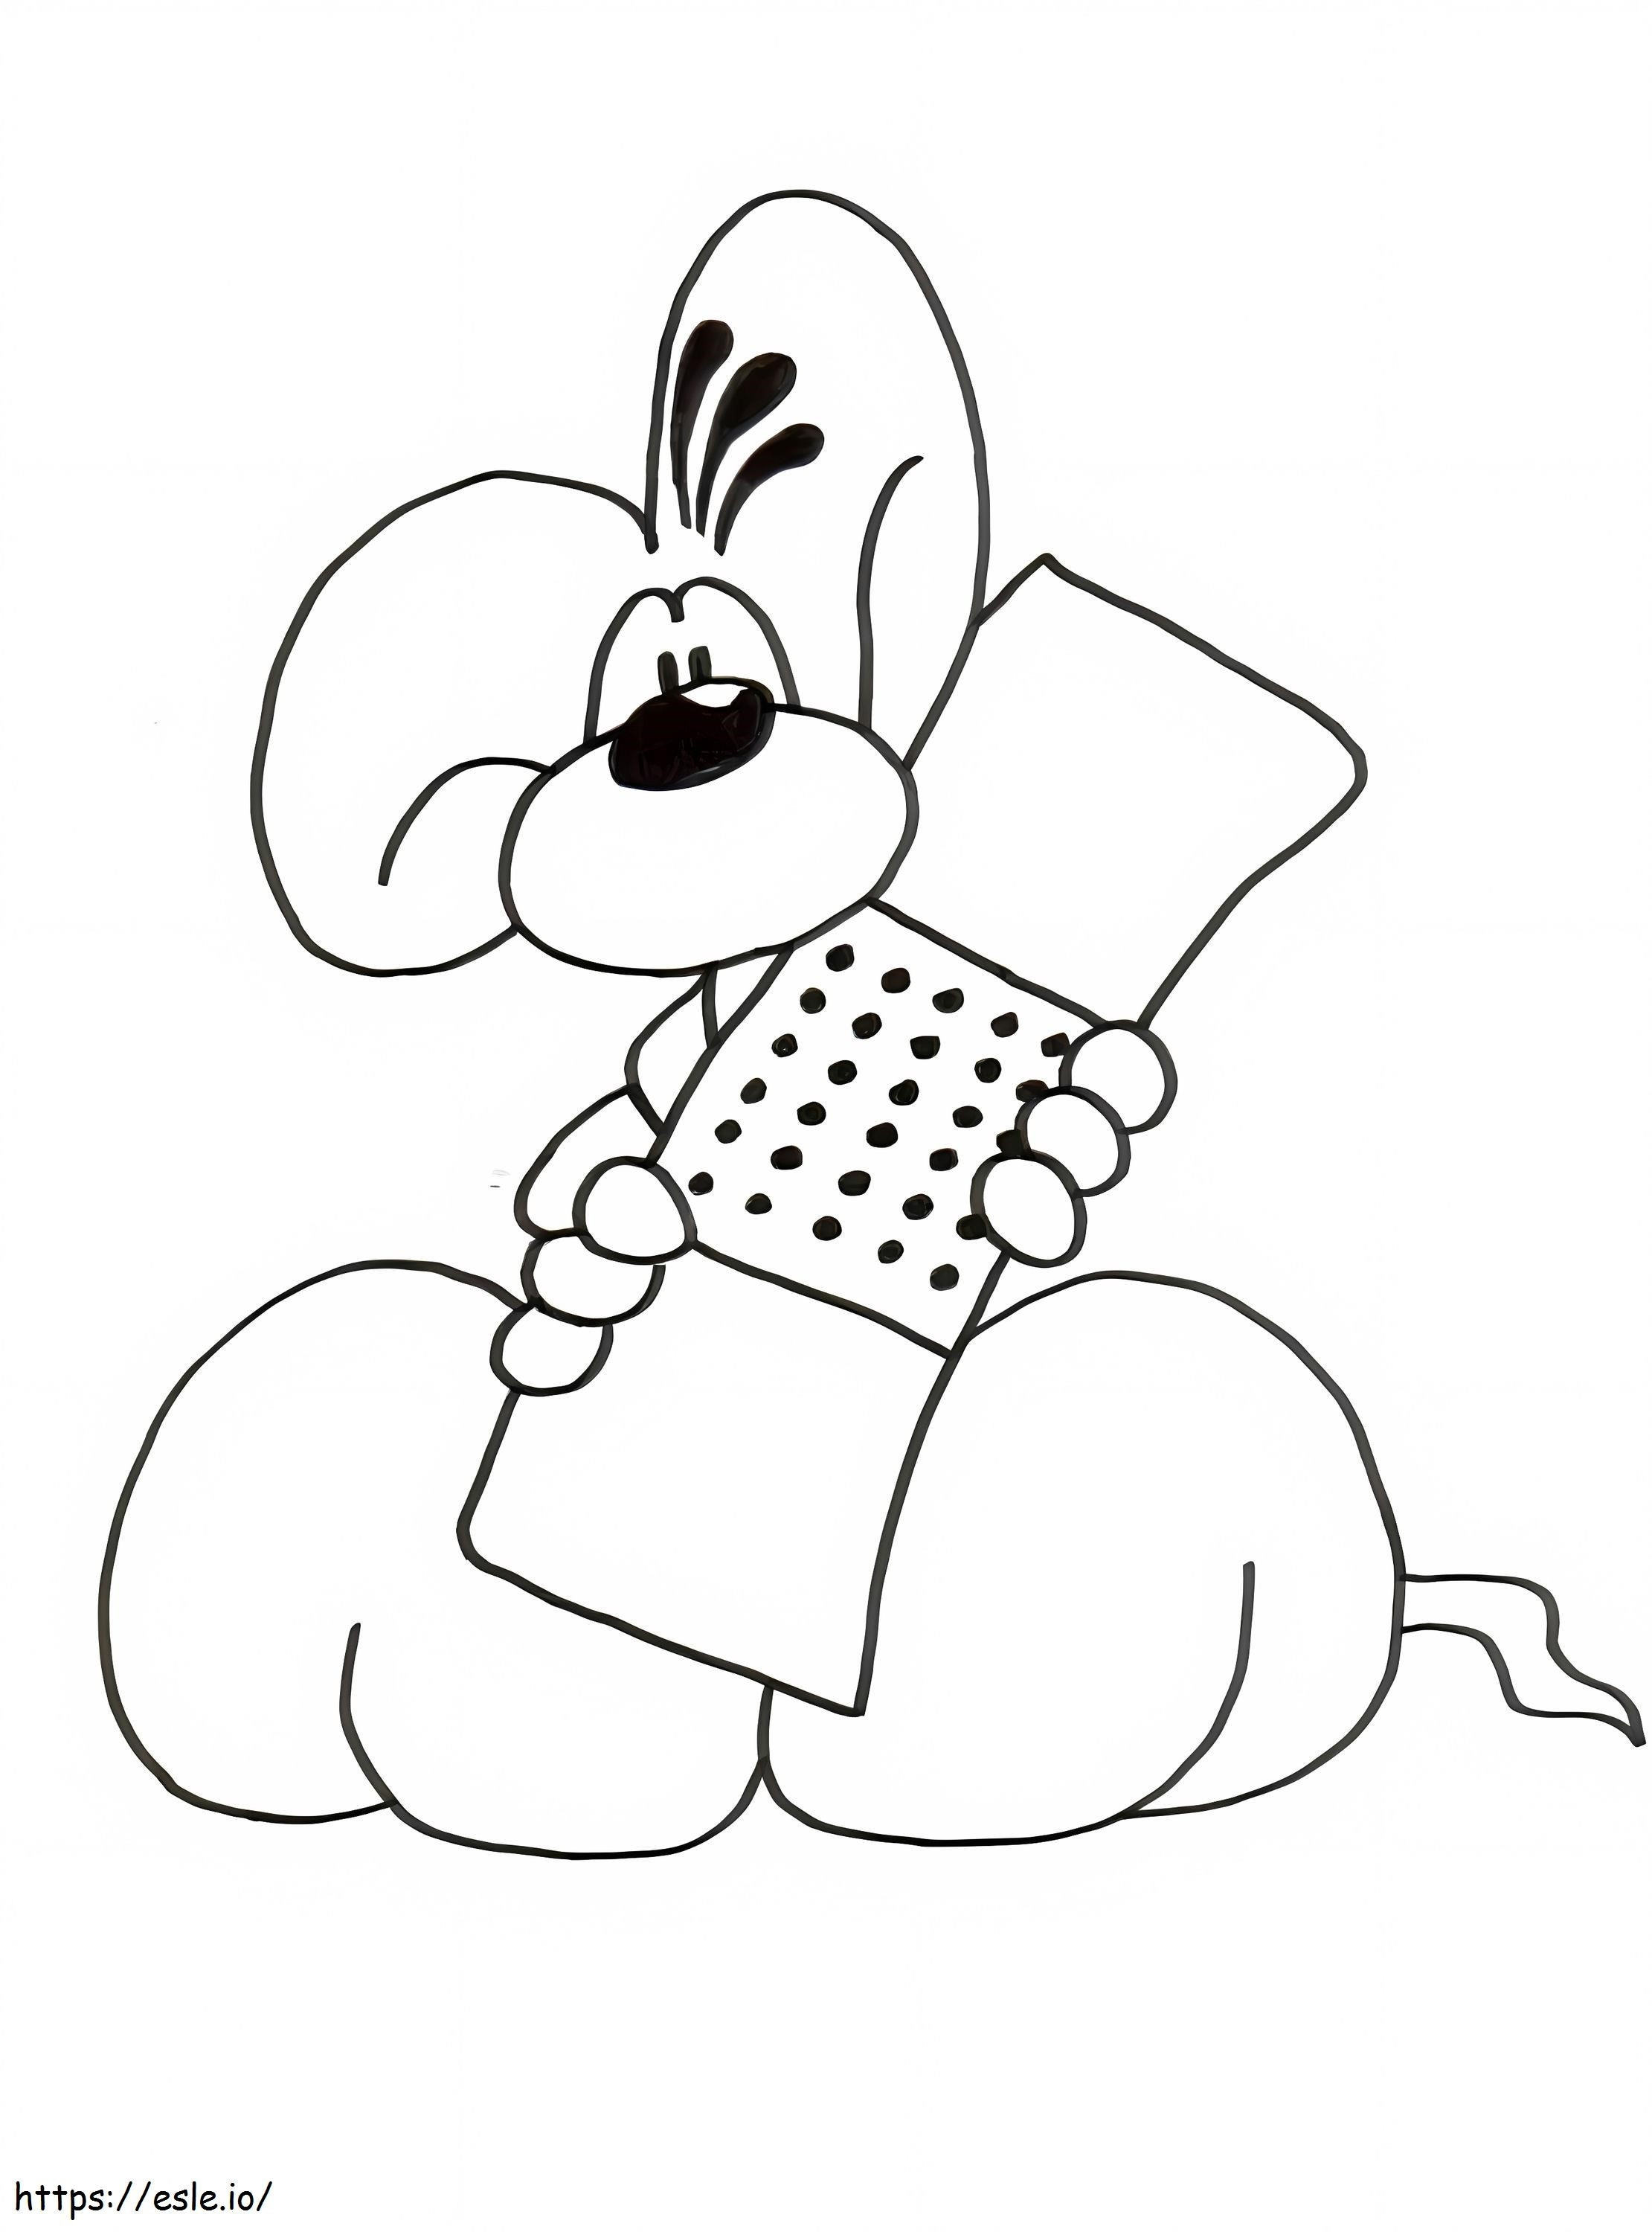 Diddle 1 coloring page